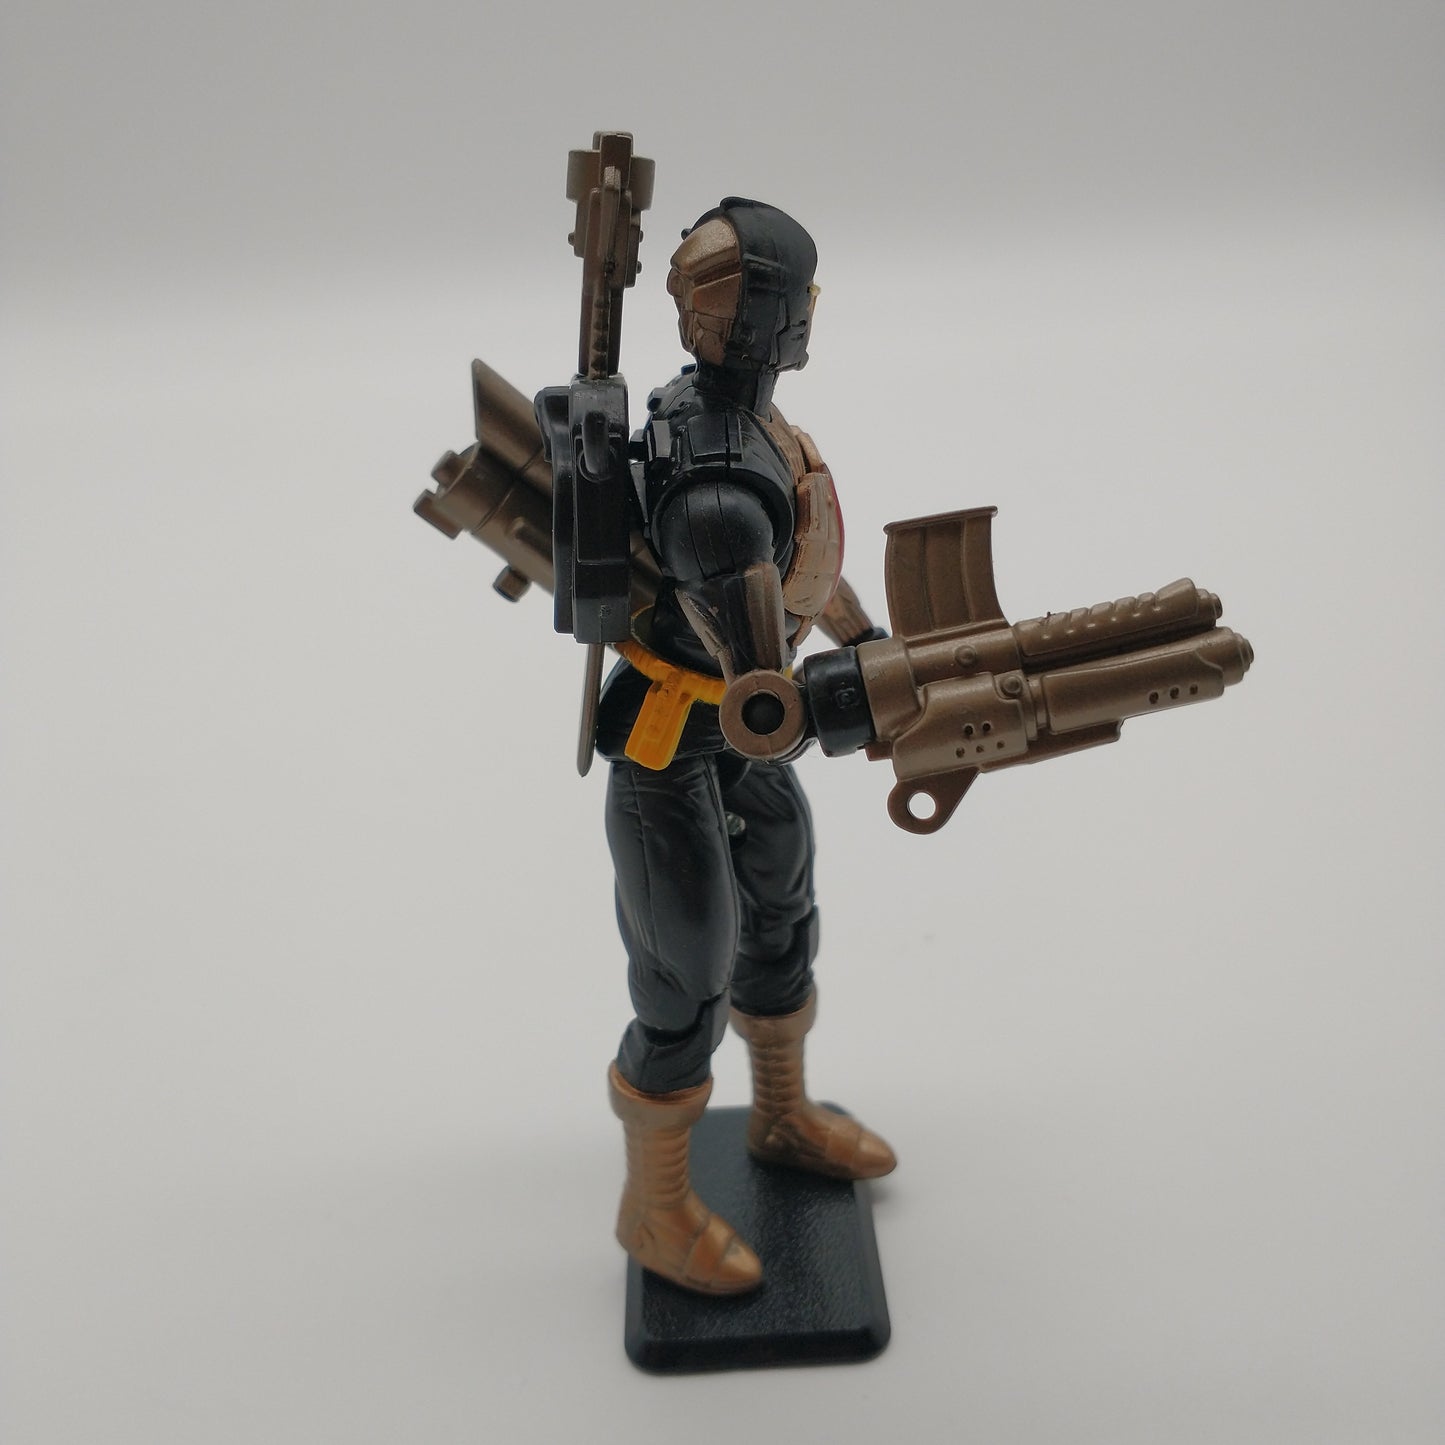  The action figure from the right side